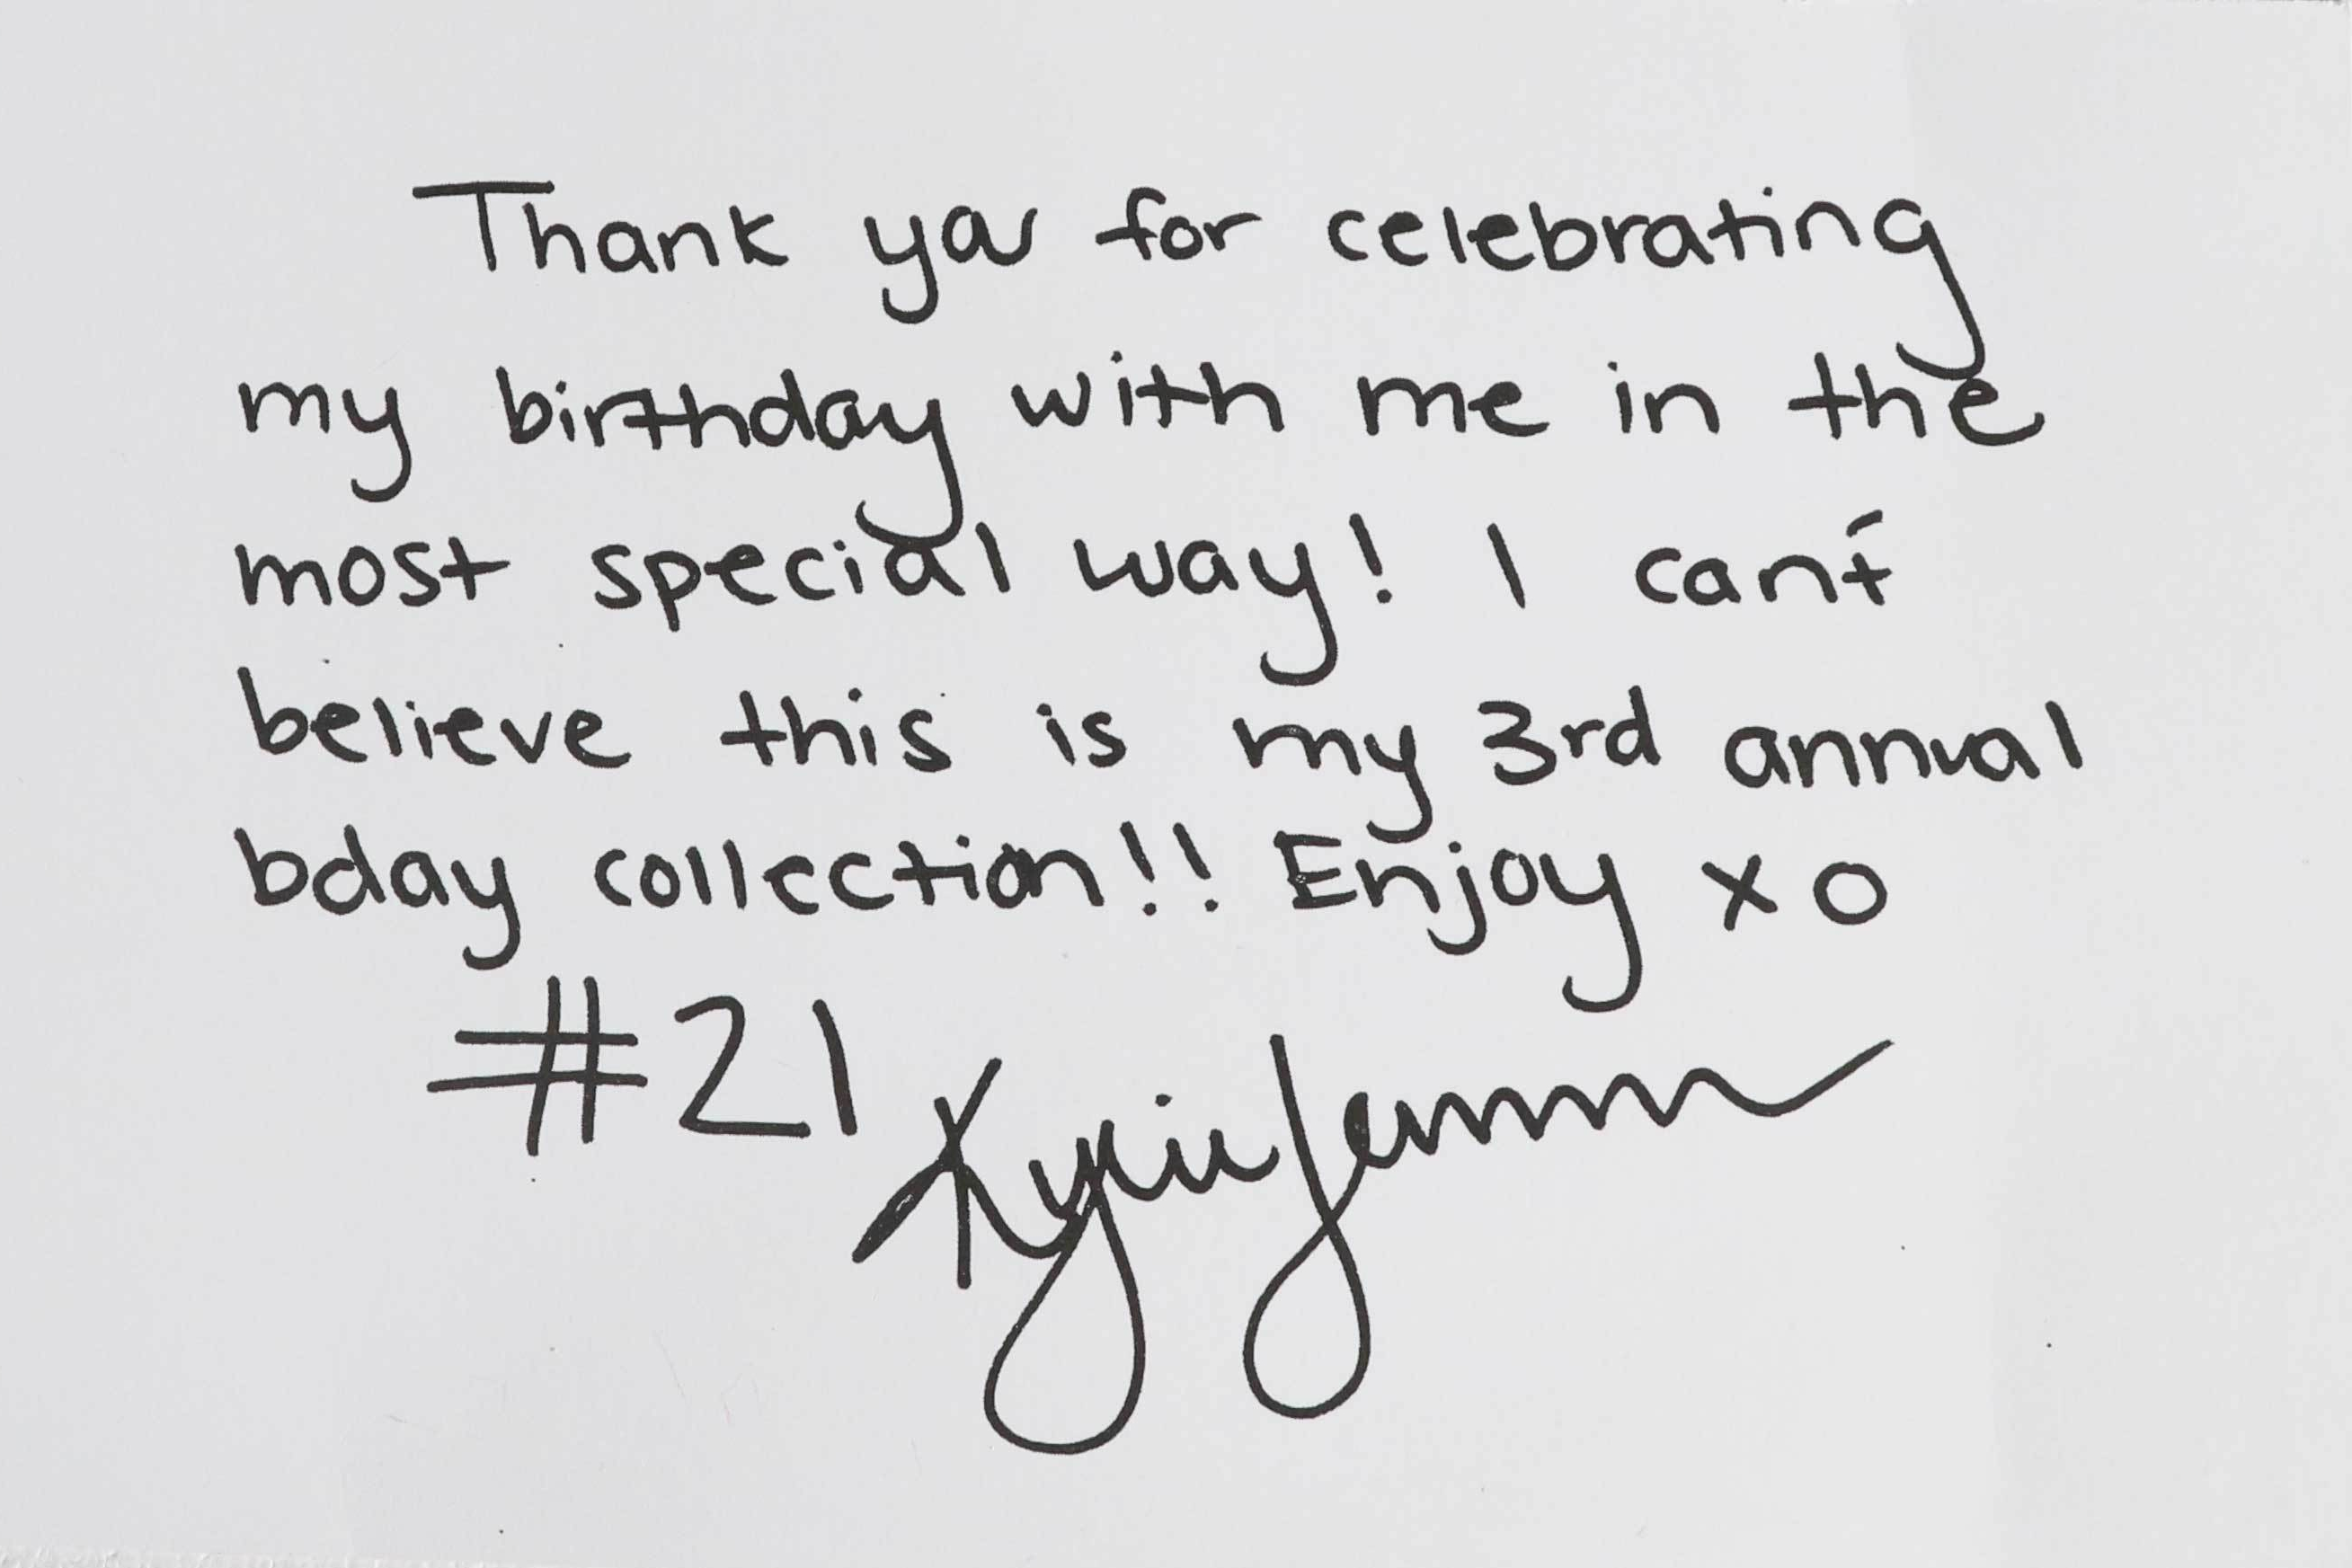 Kylie Jenner 21 Makeup Collection Birthday Card